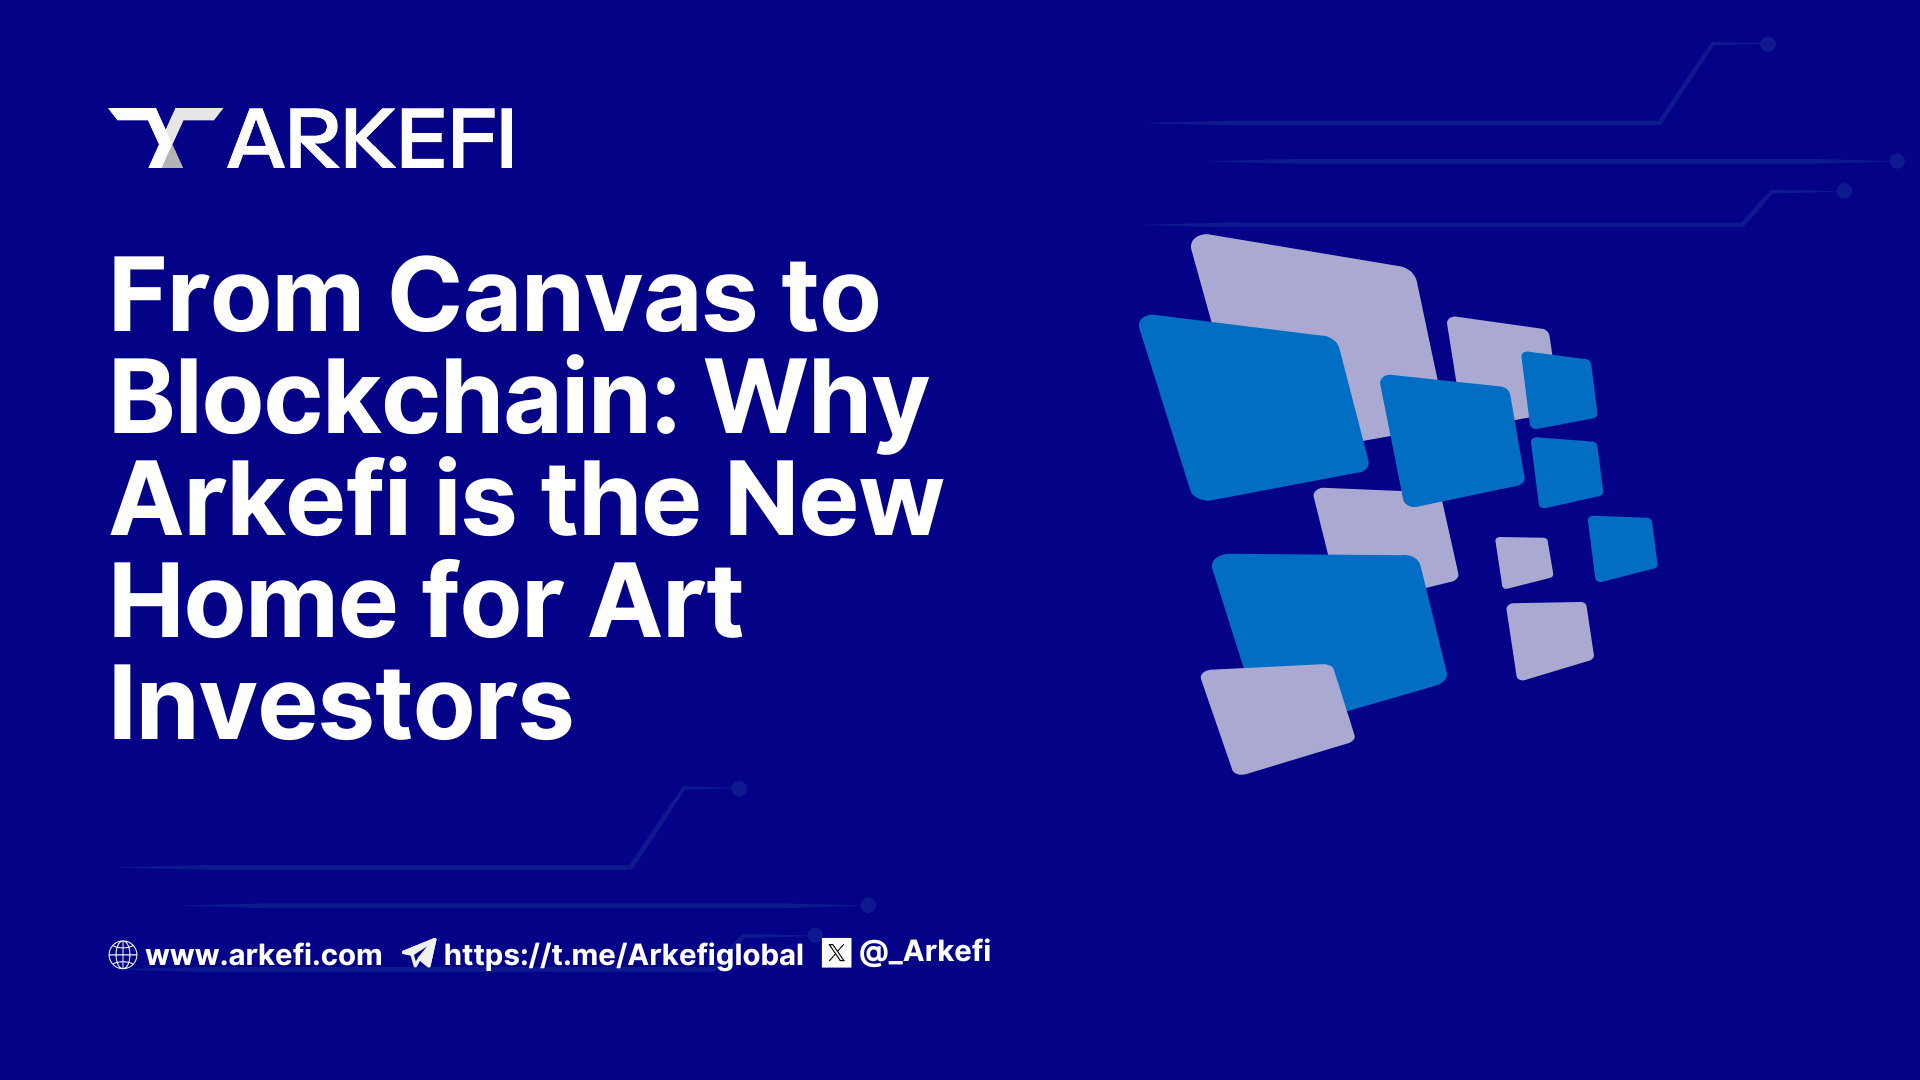 From Canvas to Blockchain: Why Arkefi is the New Home for Art Investors